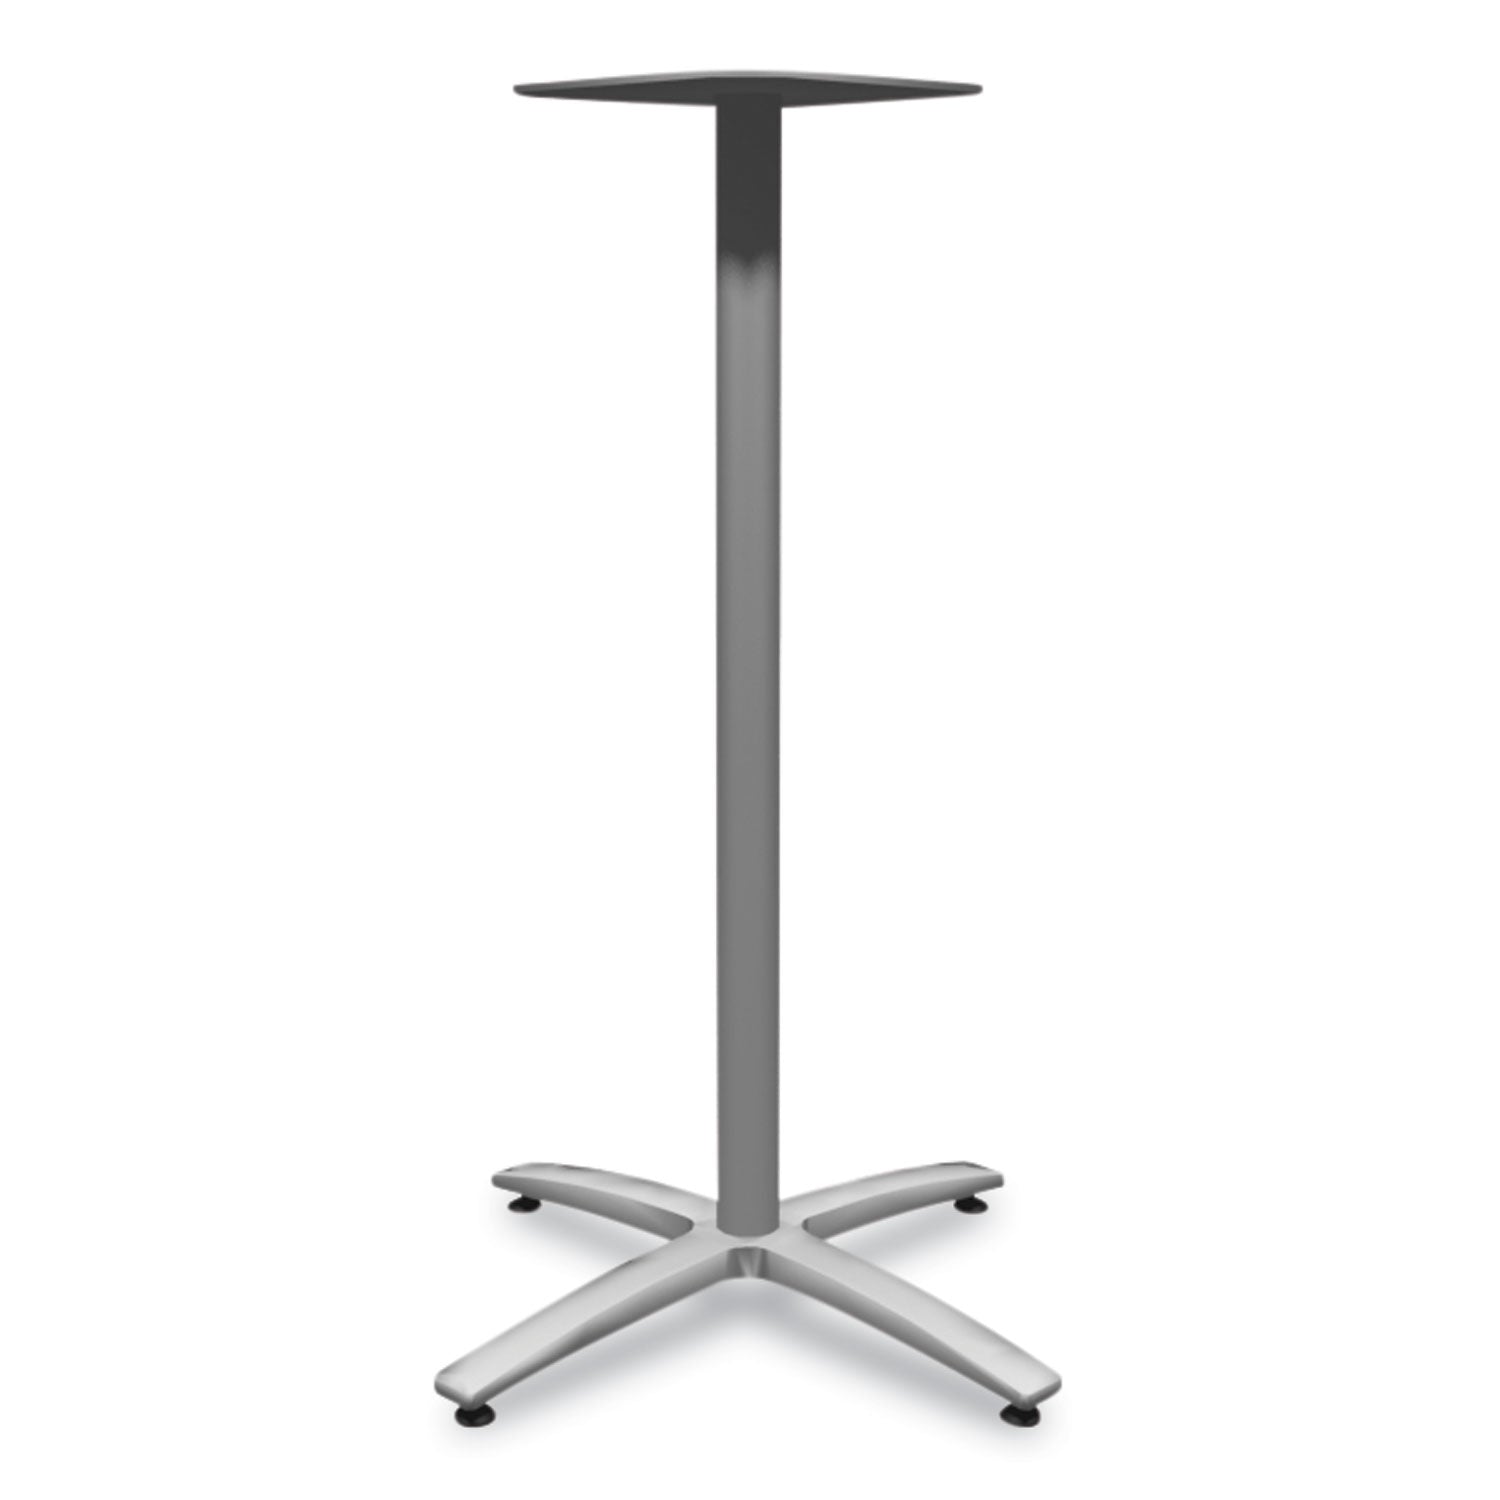 between-standing-height-x-base-for-30-to-36-table-tops-2618w-x-4112h-silver_honbtx42spr8 - 2